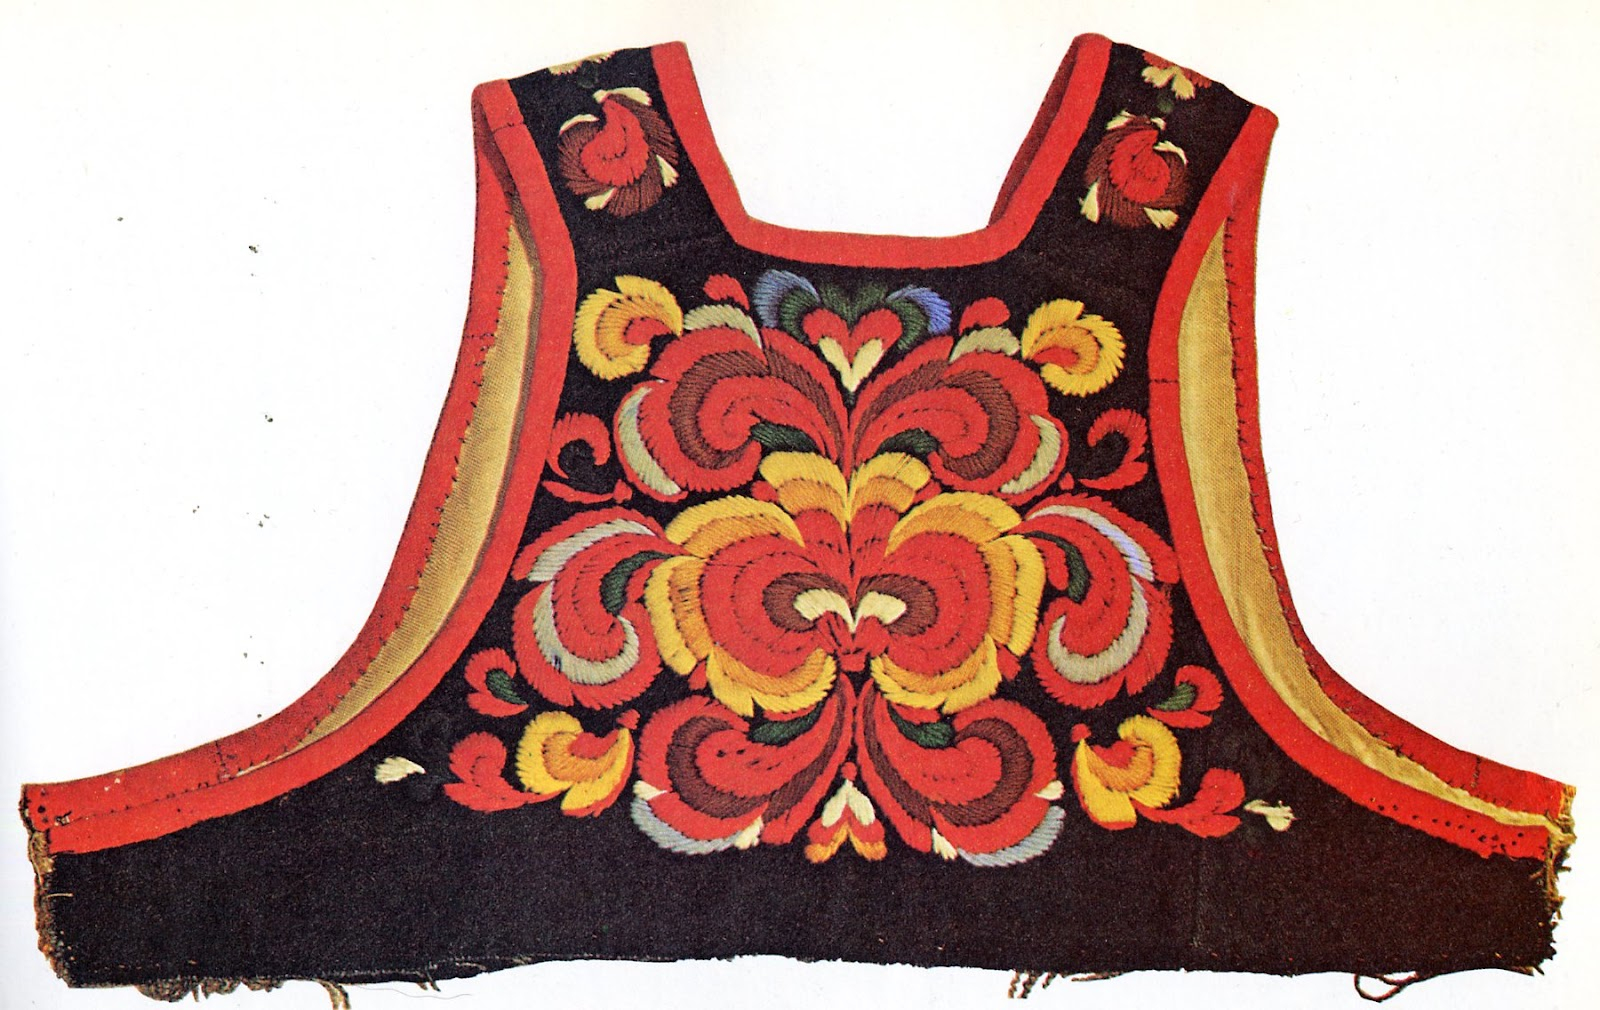 Norwegian Embroidery Patterns Folkcostumeembroidery Bunad And Rosemaling Embroidery Of